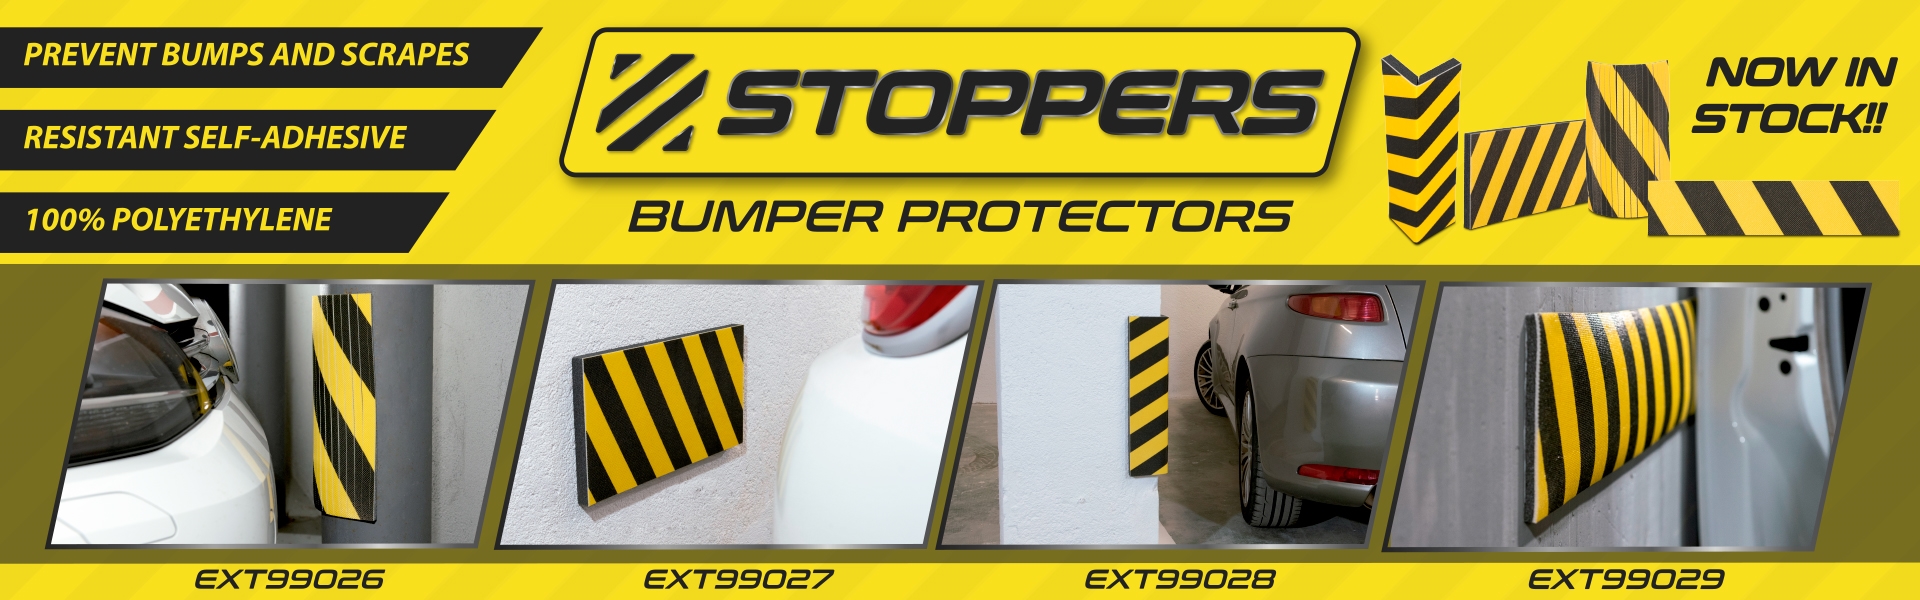  STOPPERS BUMBER PROTECTORS